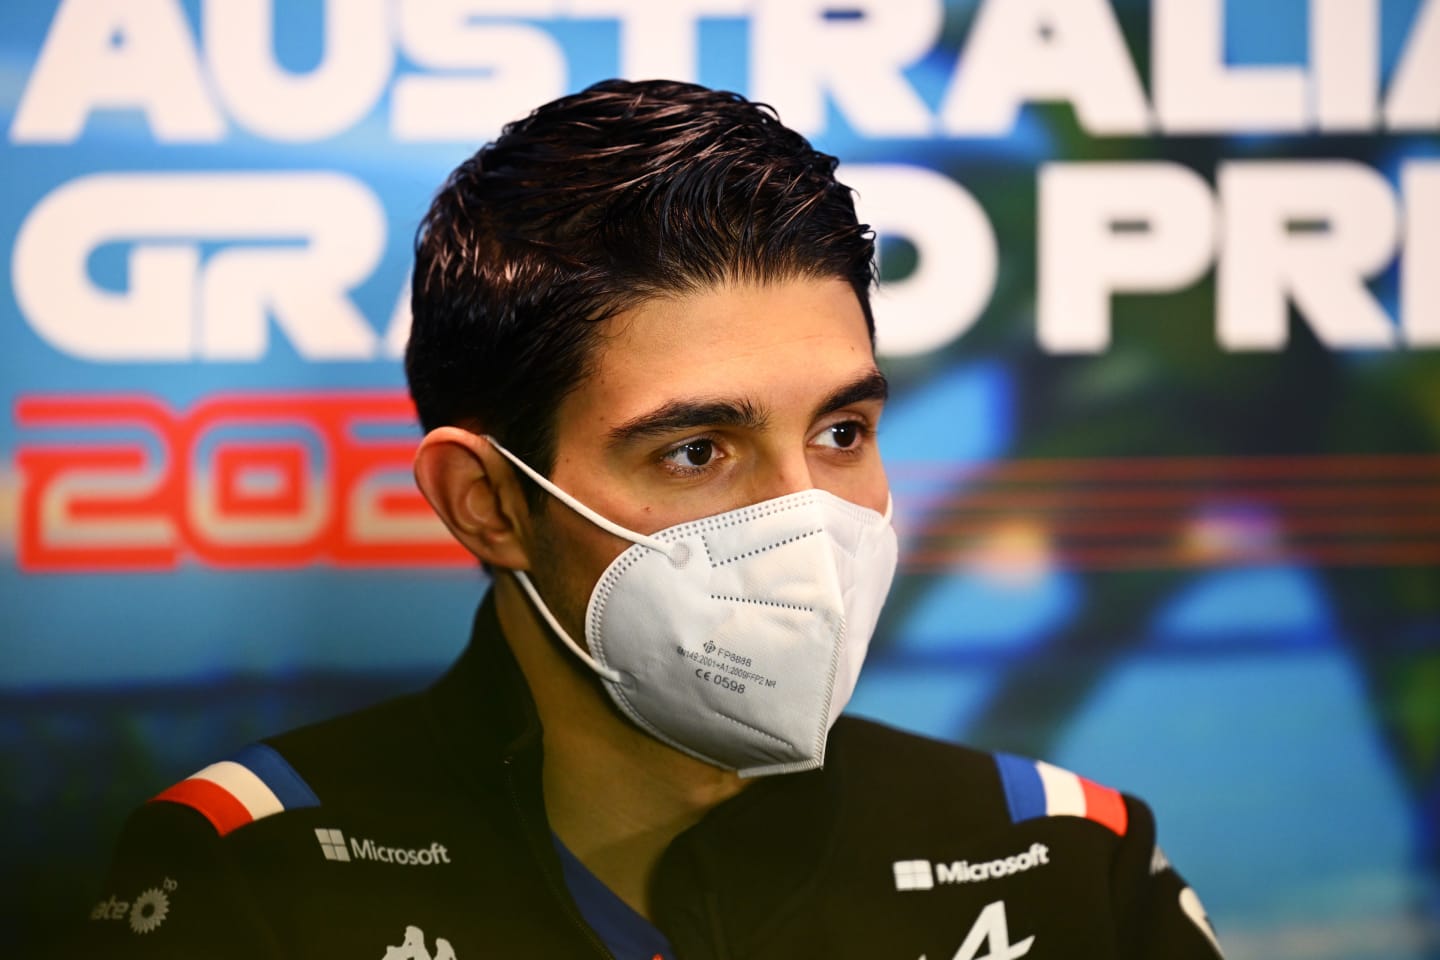 MELBOURNE, AUSTRALIA - APRIL 08: Esteban Ocon of France and Alpine F1 looks on in the Drivers Press Conference prior to practice ahead of the F1 Grand Prix of Australia at Melbourne Grand Prix Circuit on April 08, 2022 in Melbourne, Australia. (Photo by Clive Mason/Getty Images)